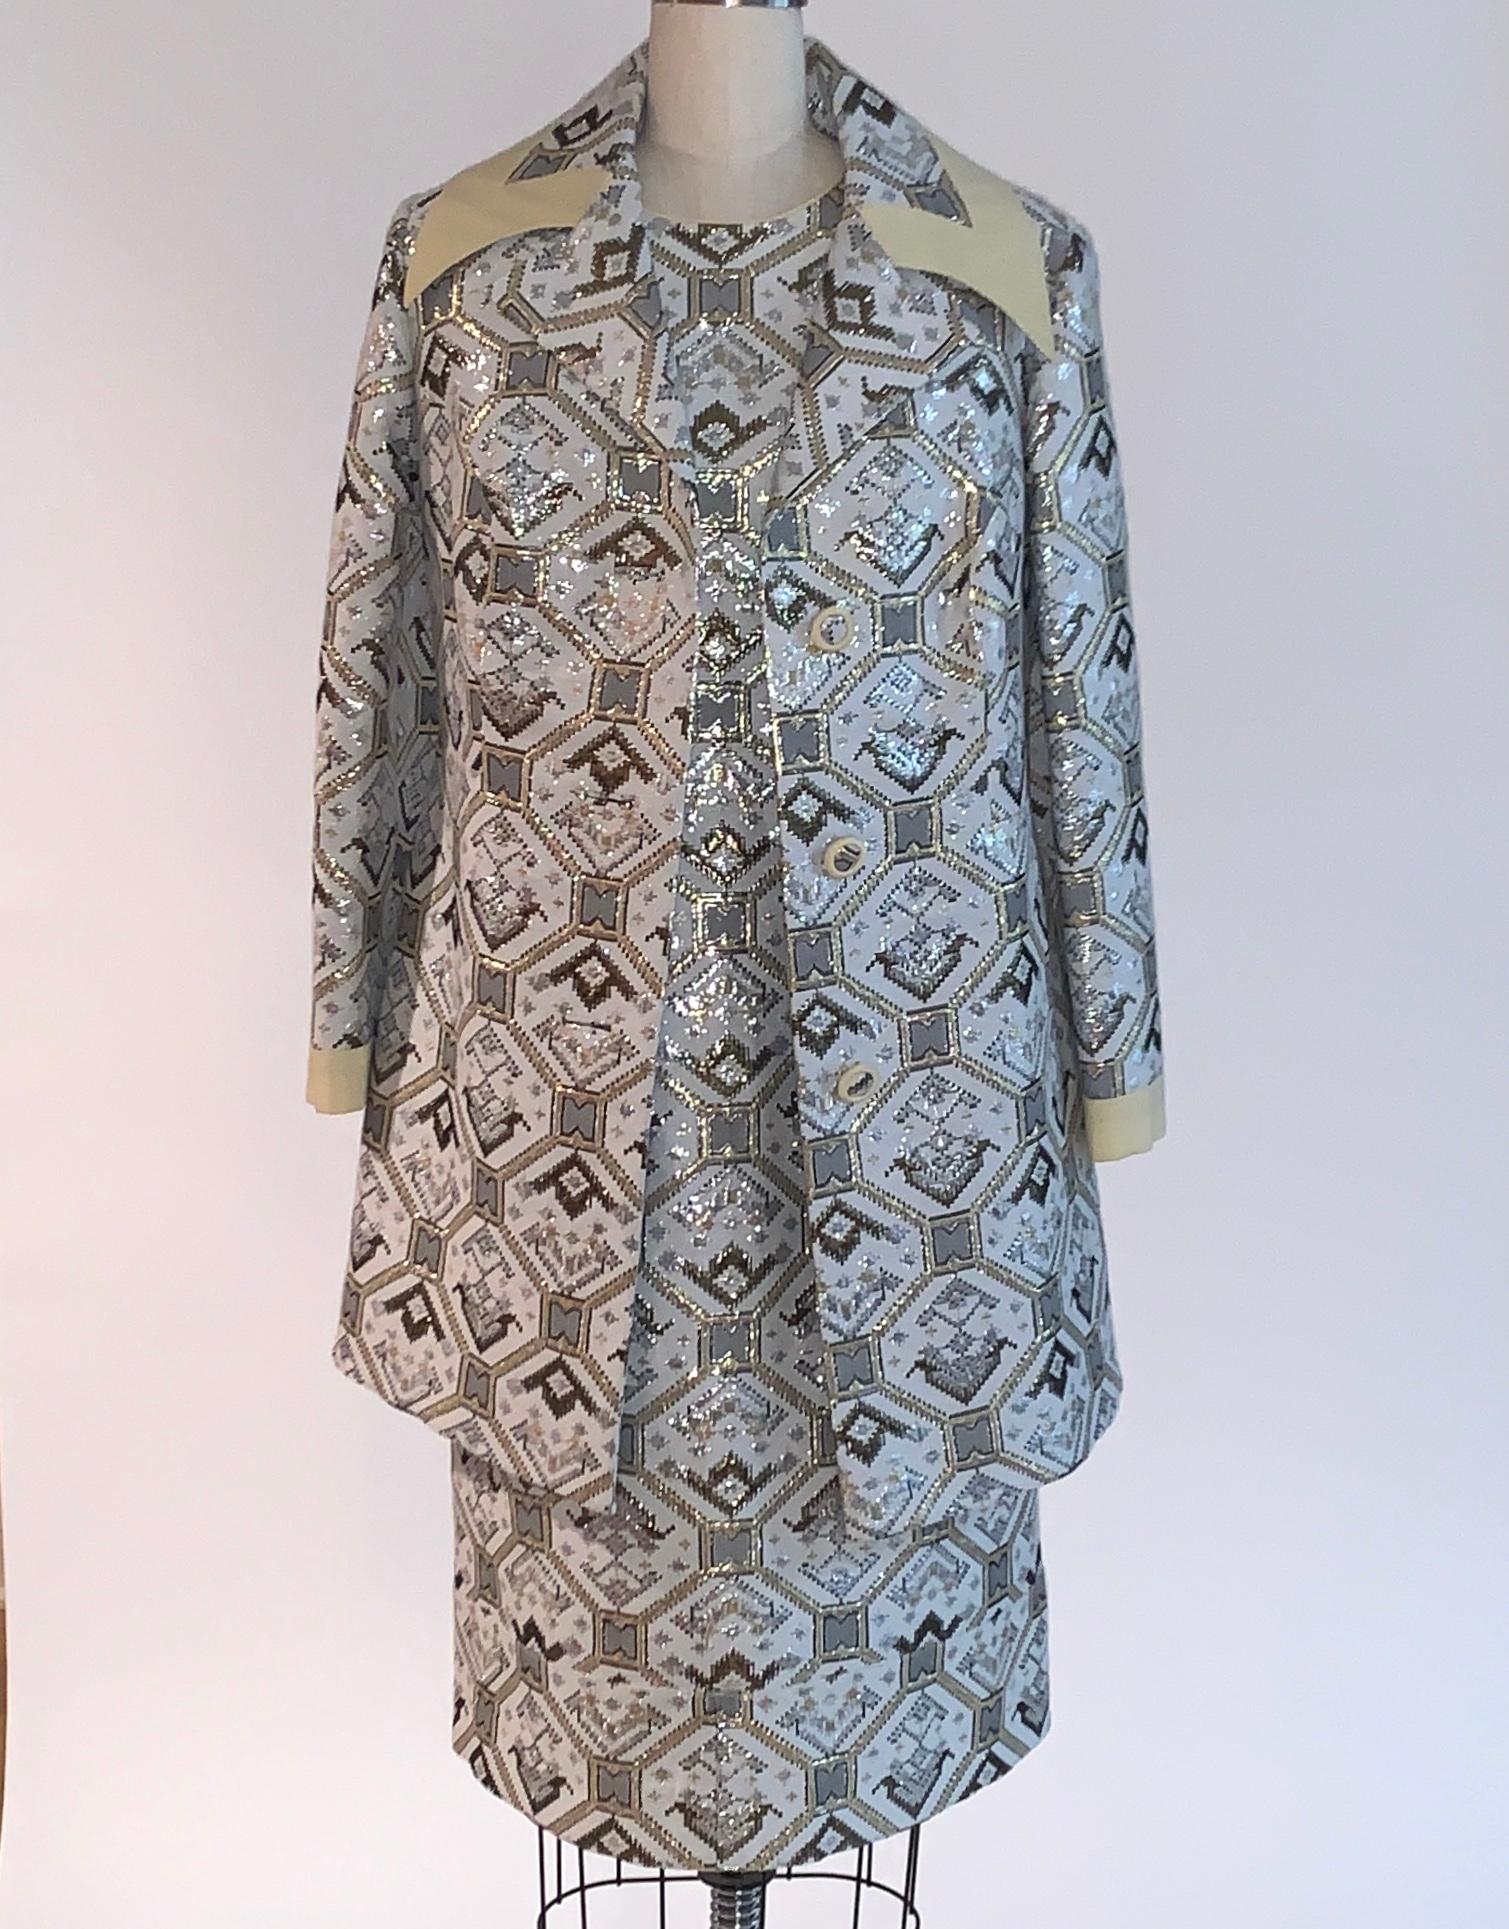 Stunning vintage 1970s short sleeve shift dress and coat set set in white, gold, and silver metallic brocade. Dress has golden yellow piped trim at neck and closes with back zip and hook and loop. Lined in silky material. 

Coat features a wide